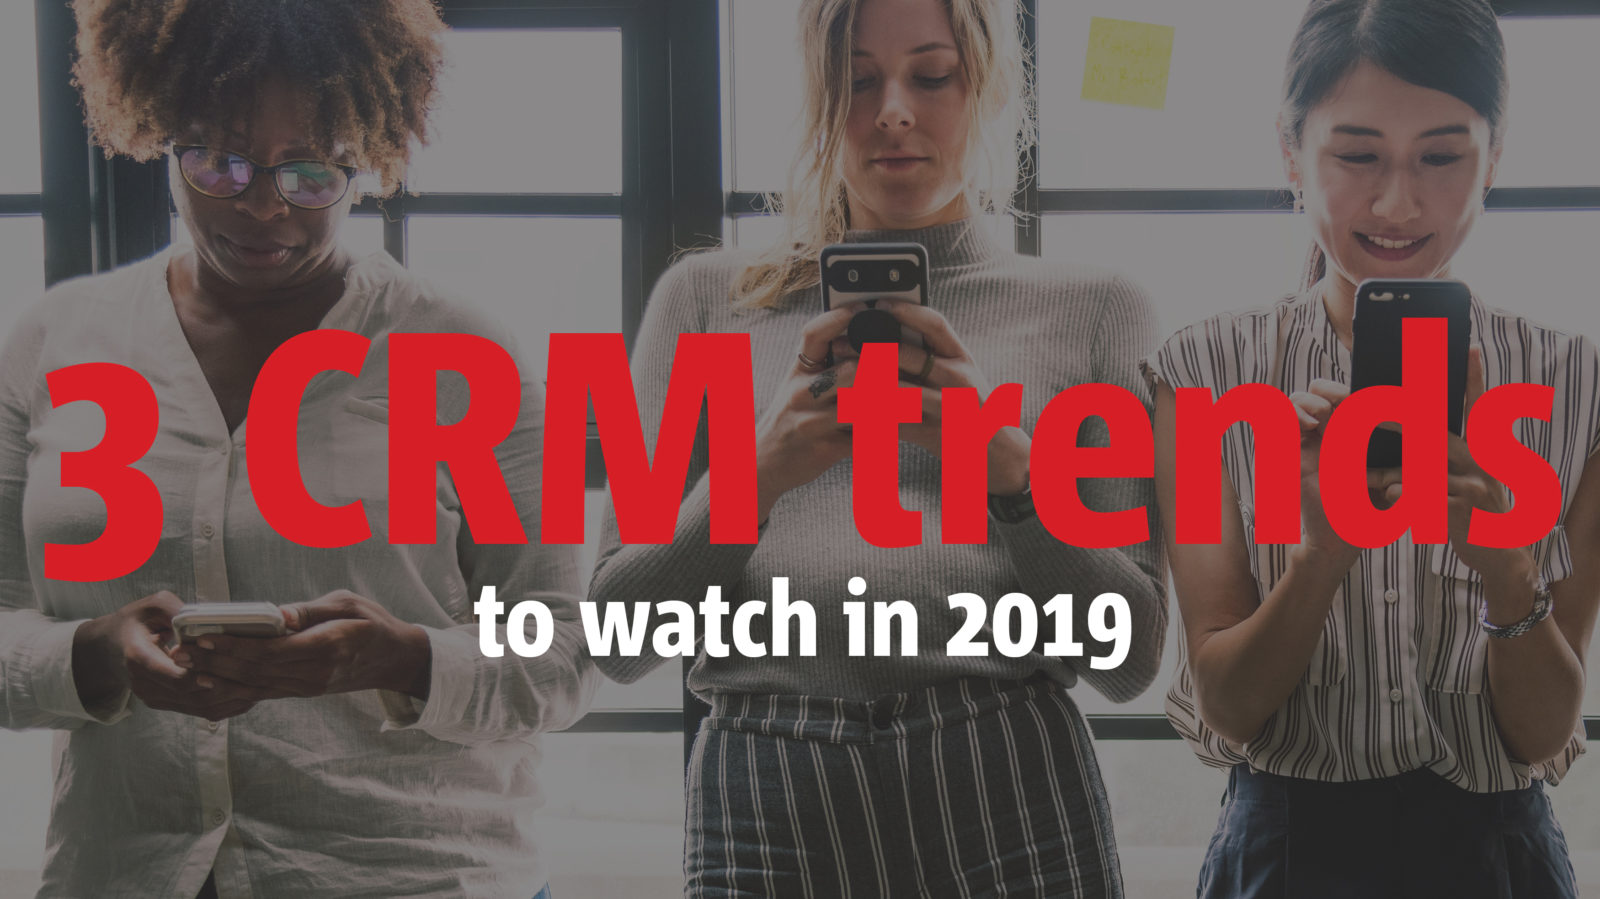 Hey {firstname}, keep an eye on these CRM trends for 2019!